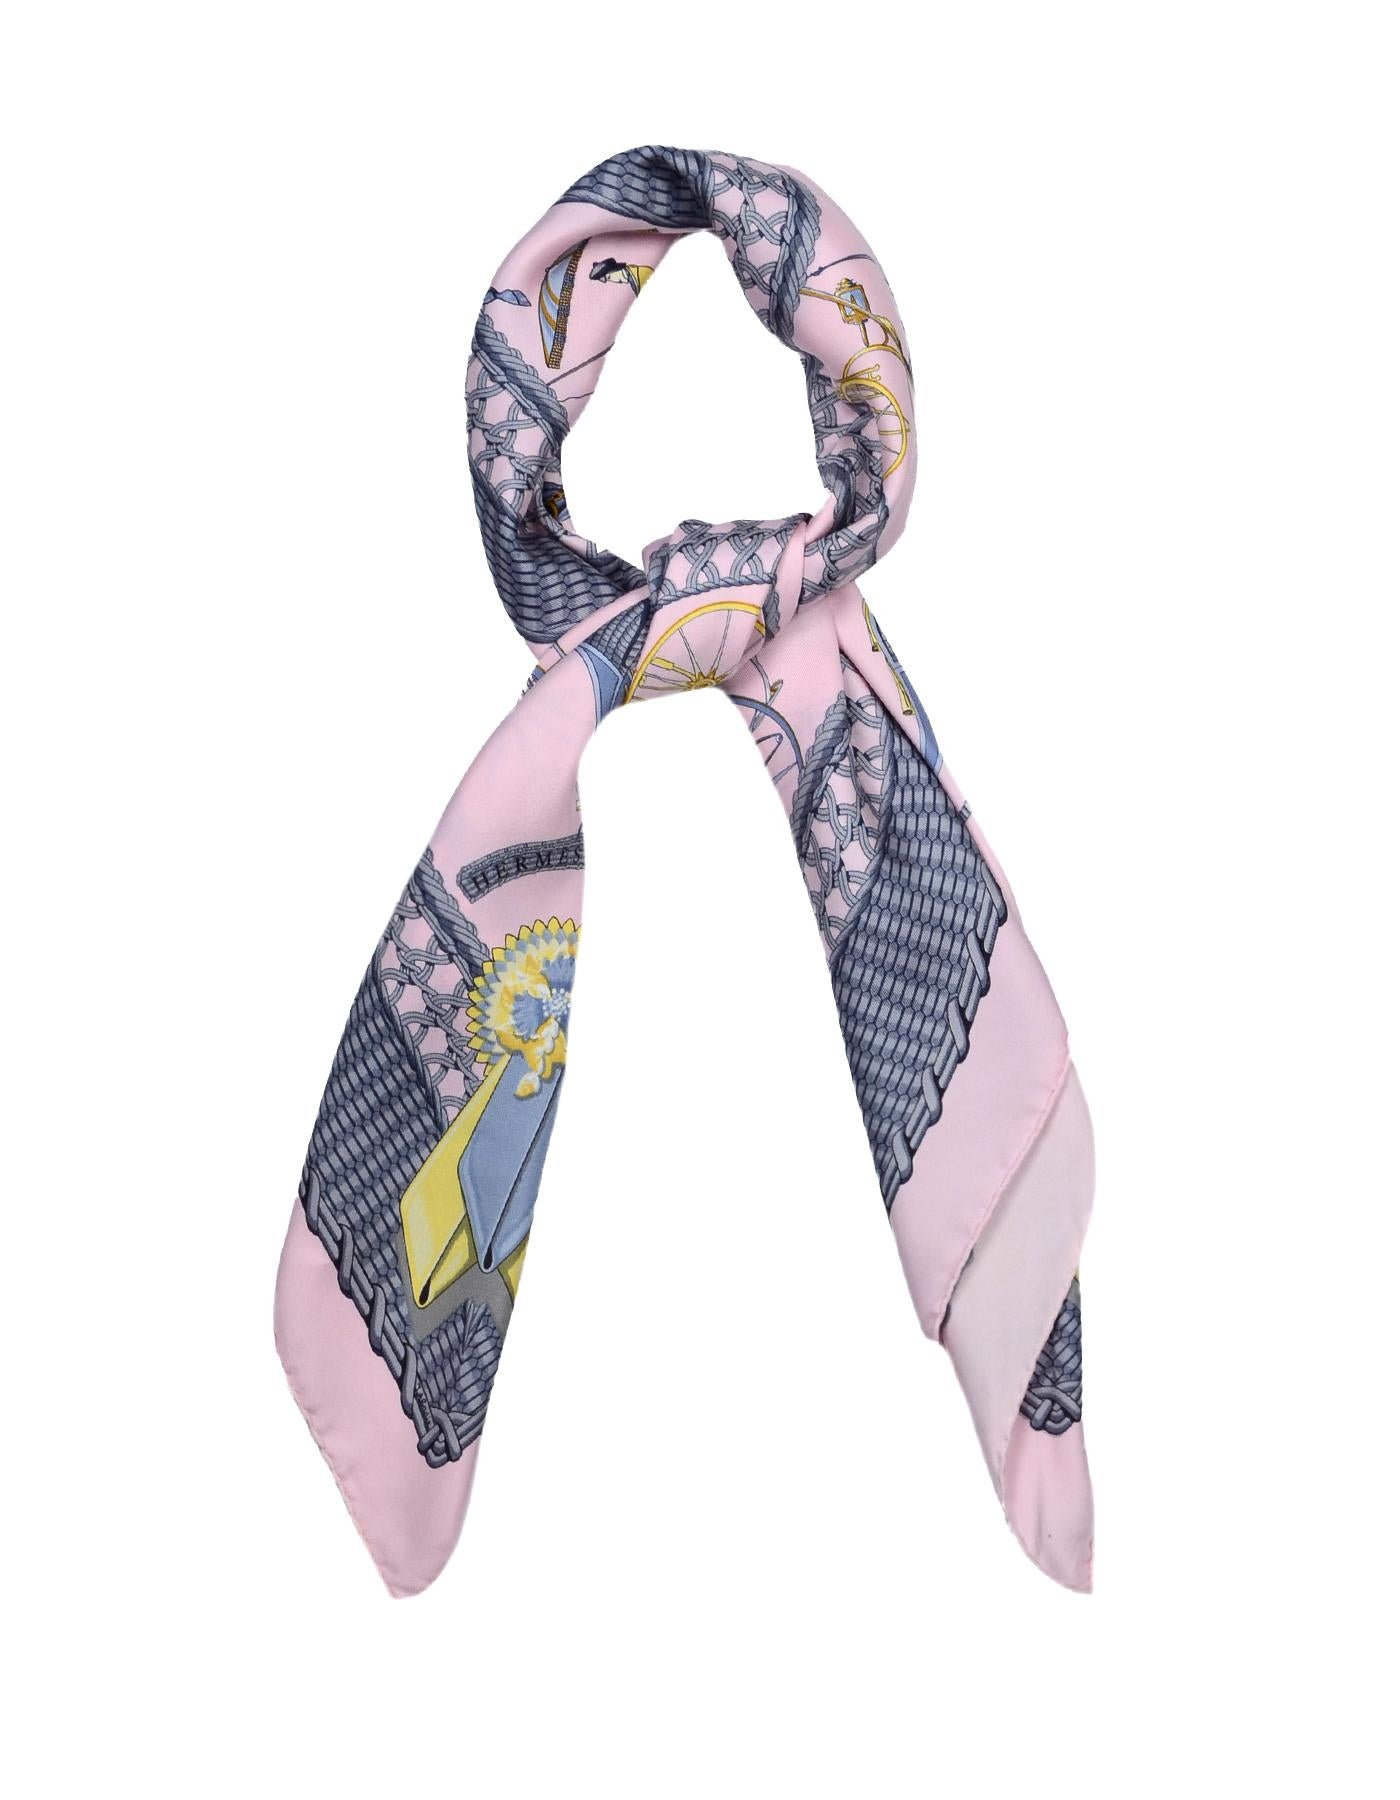 Hermes Pink/Grey Voitures Paniers 90cm Silk Scarf

Made In:  France
Color: Pink/grey
Materials: 100% silk
Overall Condition: Very good pre-owned condition with exception of light staining by border.
Estimated Retail: $395 + tax

Measurements: 
35